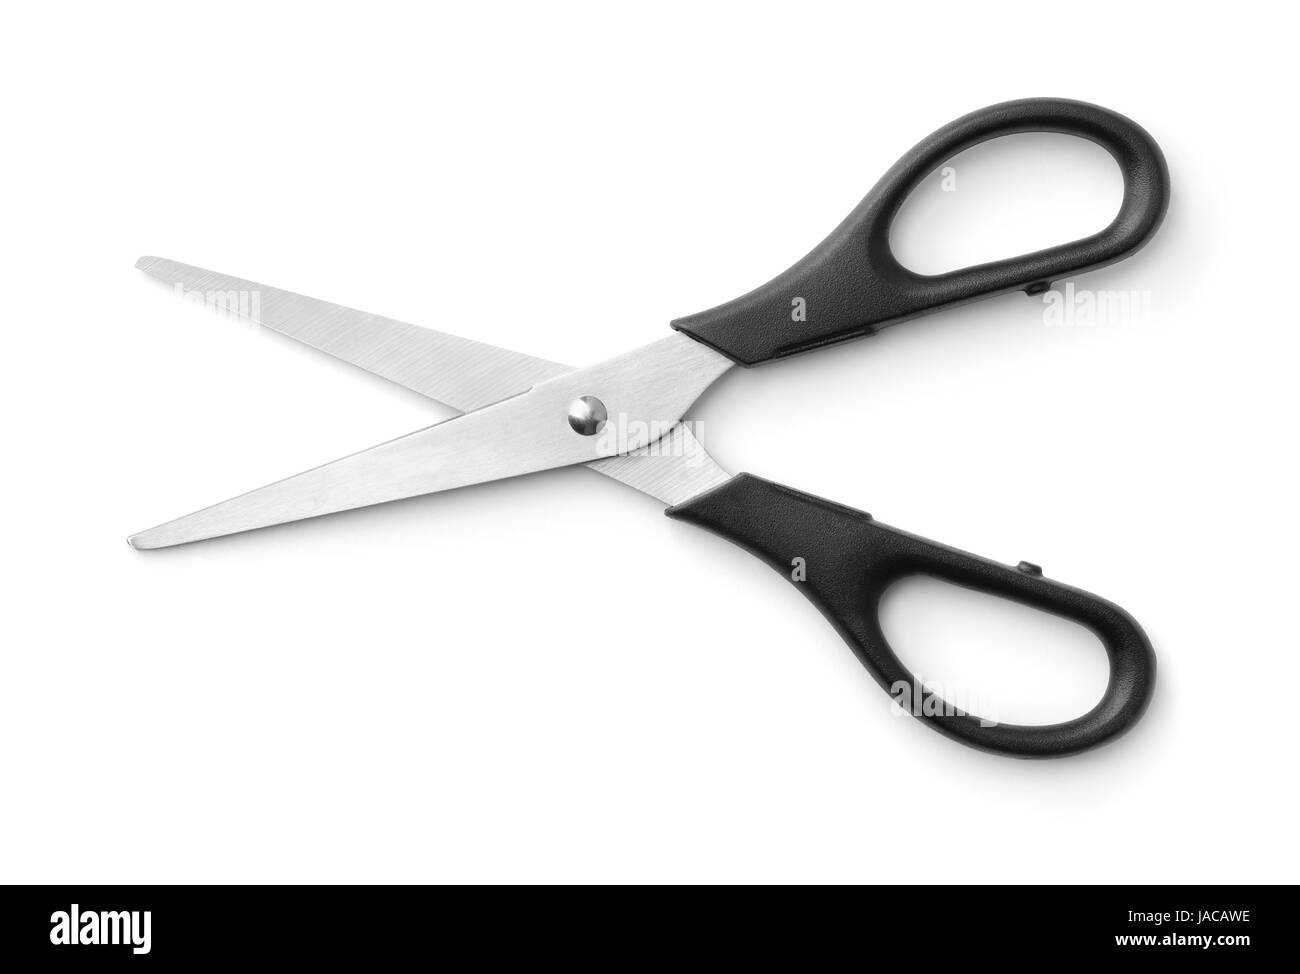 Top view of black handled scissors isolated on white Stock Photo